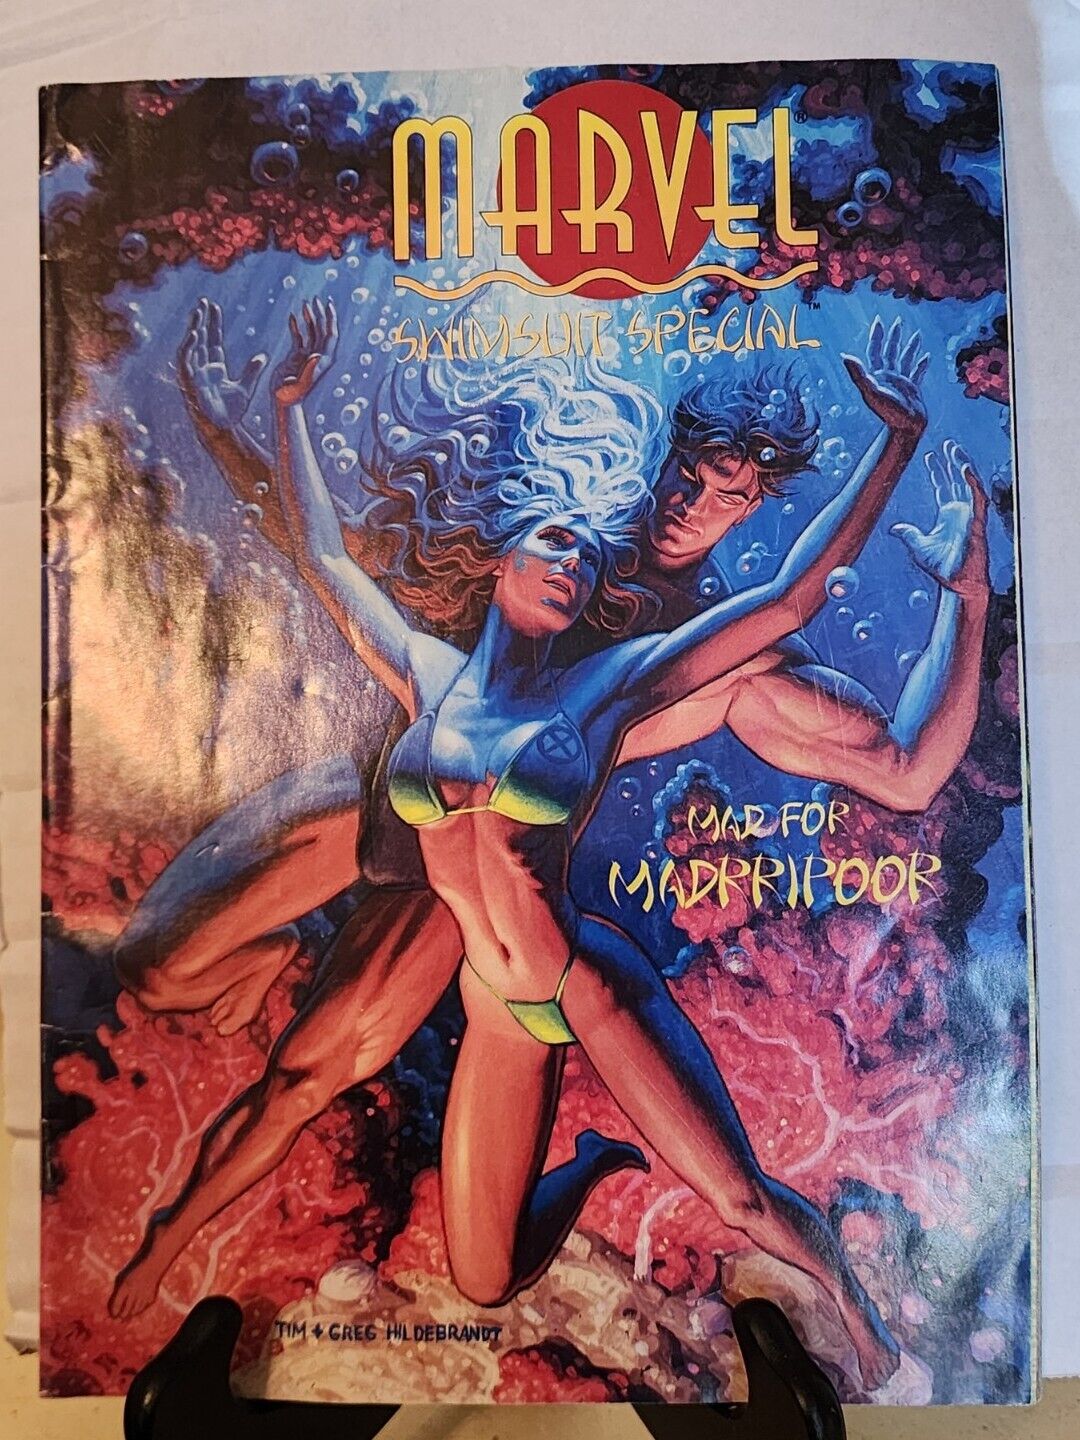 MARVEL SWIMSUIT SPECIAL Issue #4, Mad for Madrripoor 1995 Hildebrandt Cover